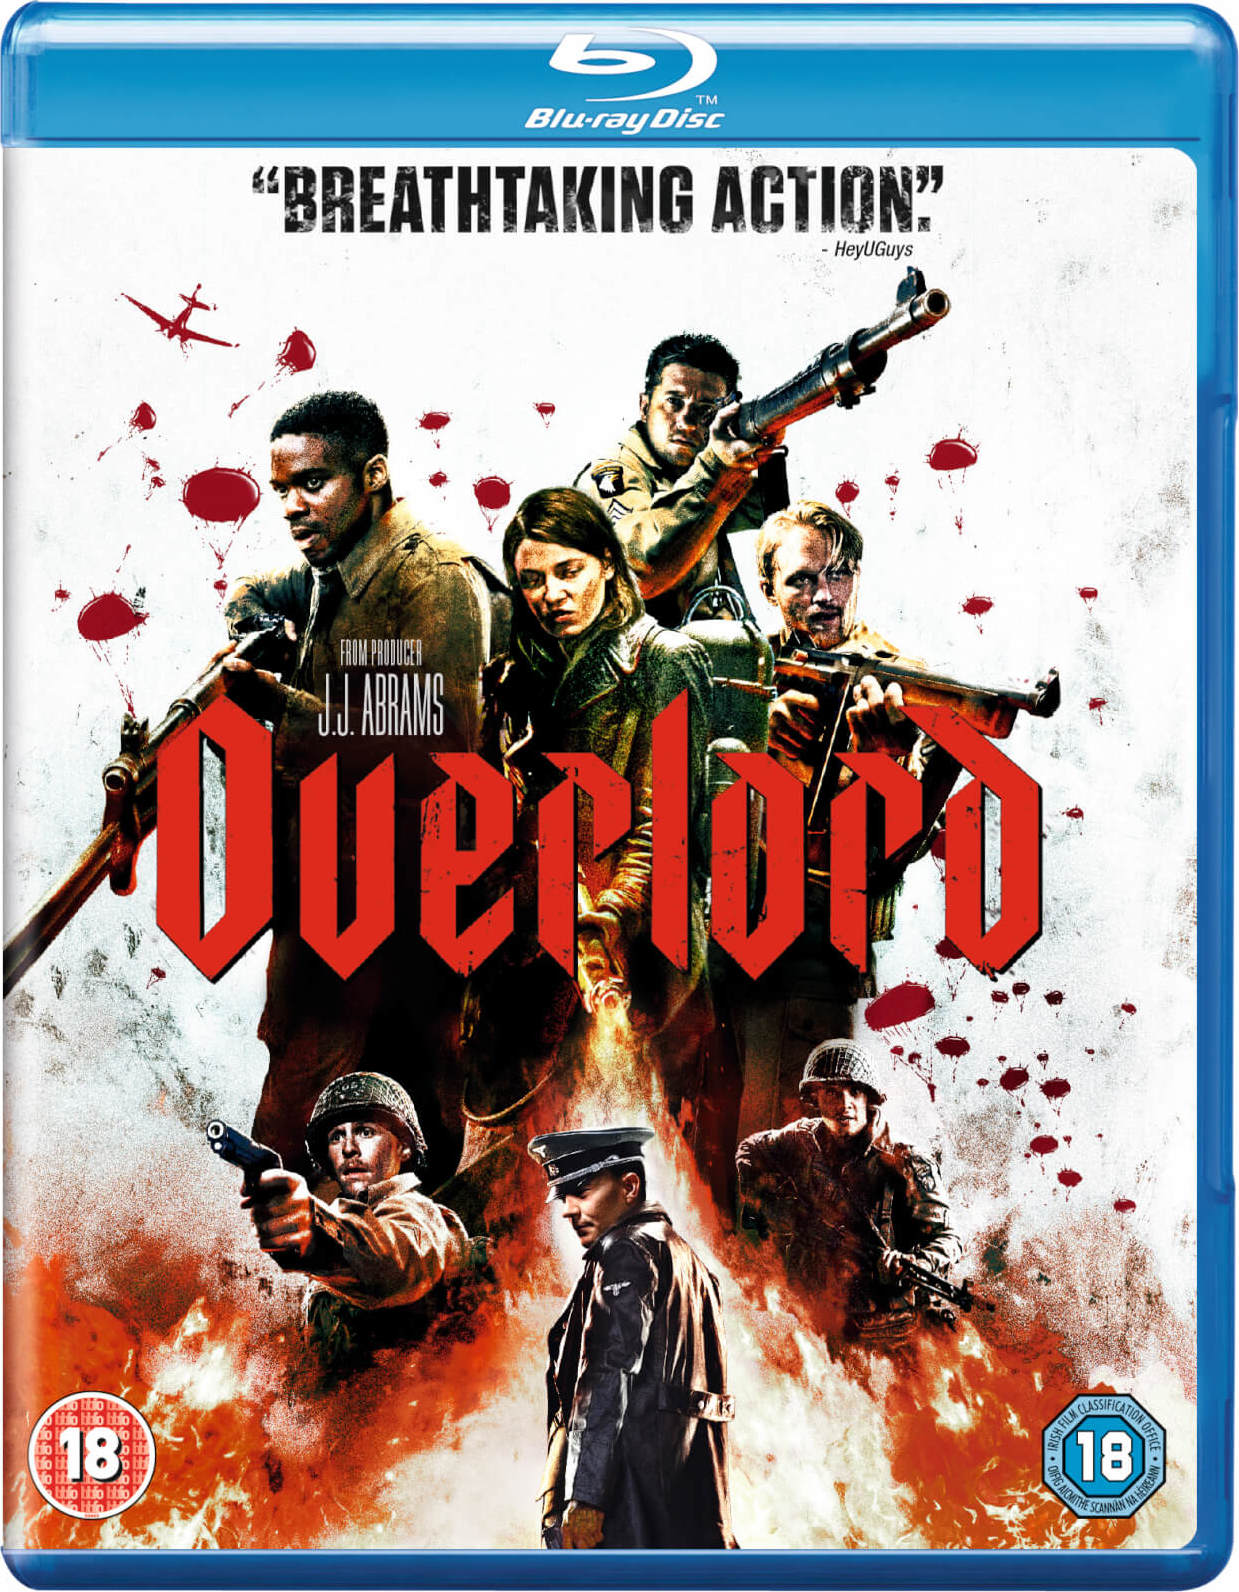 Overlord (2018) Operación Overlord (2018) [AC3 5.1 + SUP/SRT] [Blu Ray-Rip] [GOOGLEDRIVE*] 221805_front